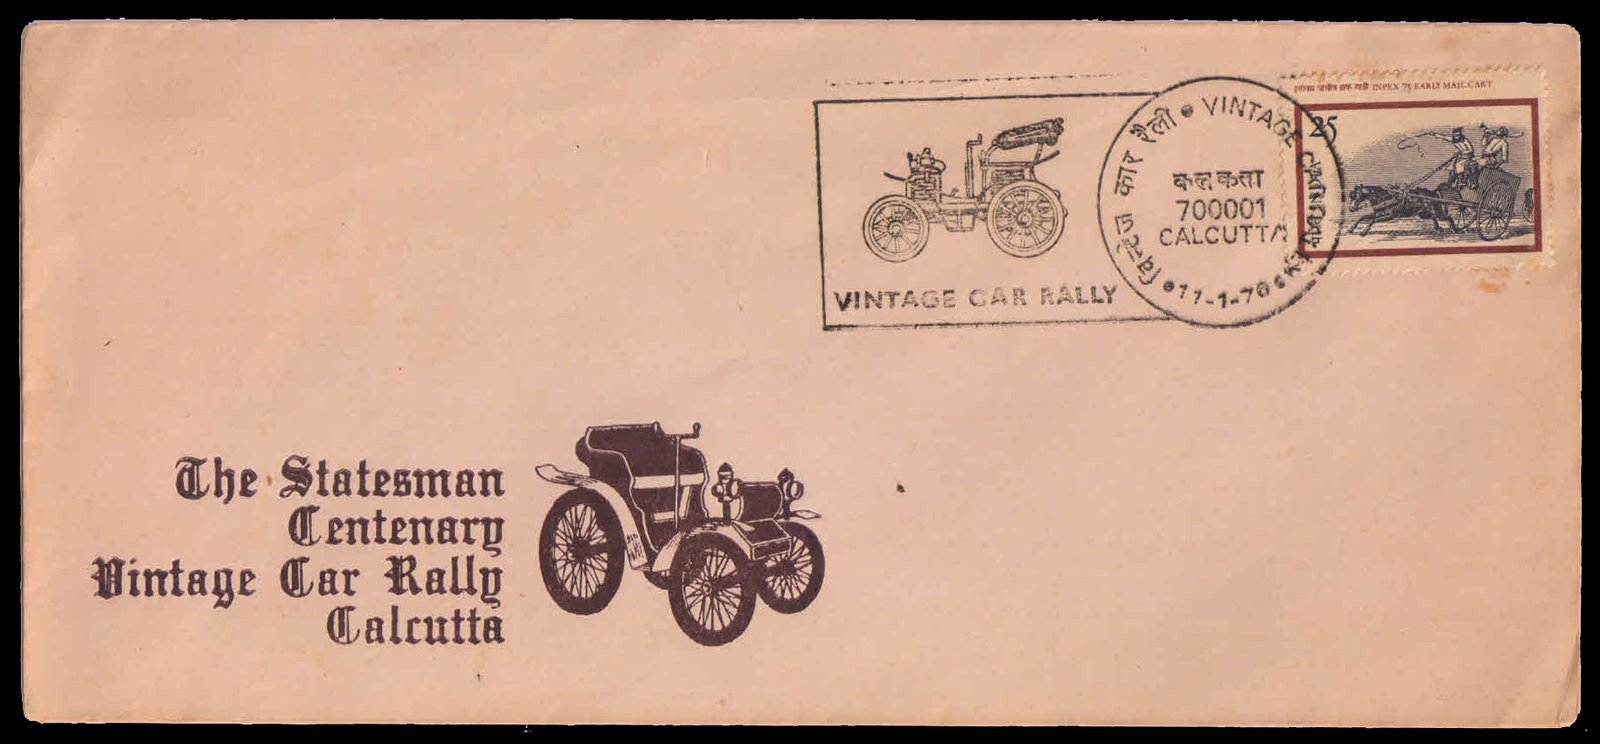 INDIA 11-1-1976, Vintage Car Rally Special Cover